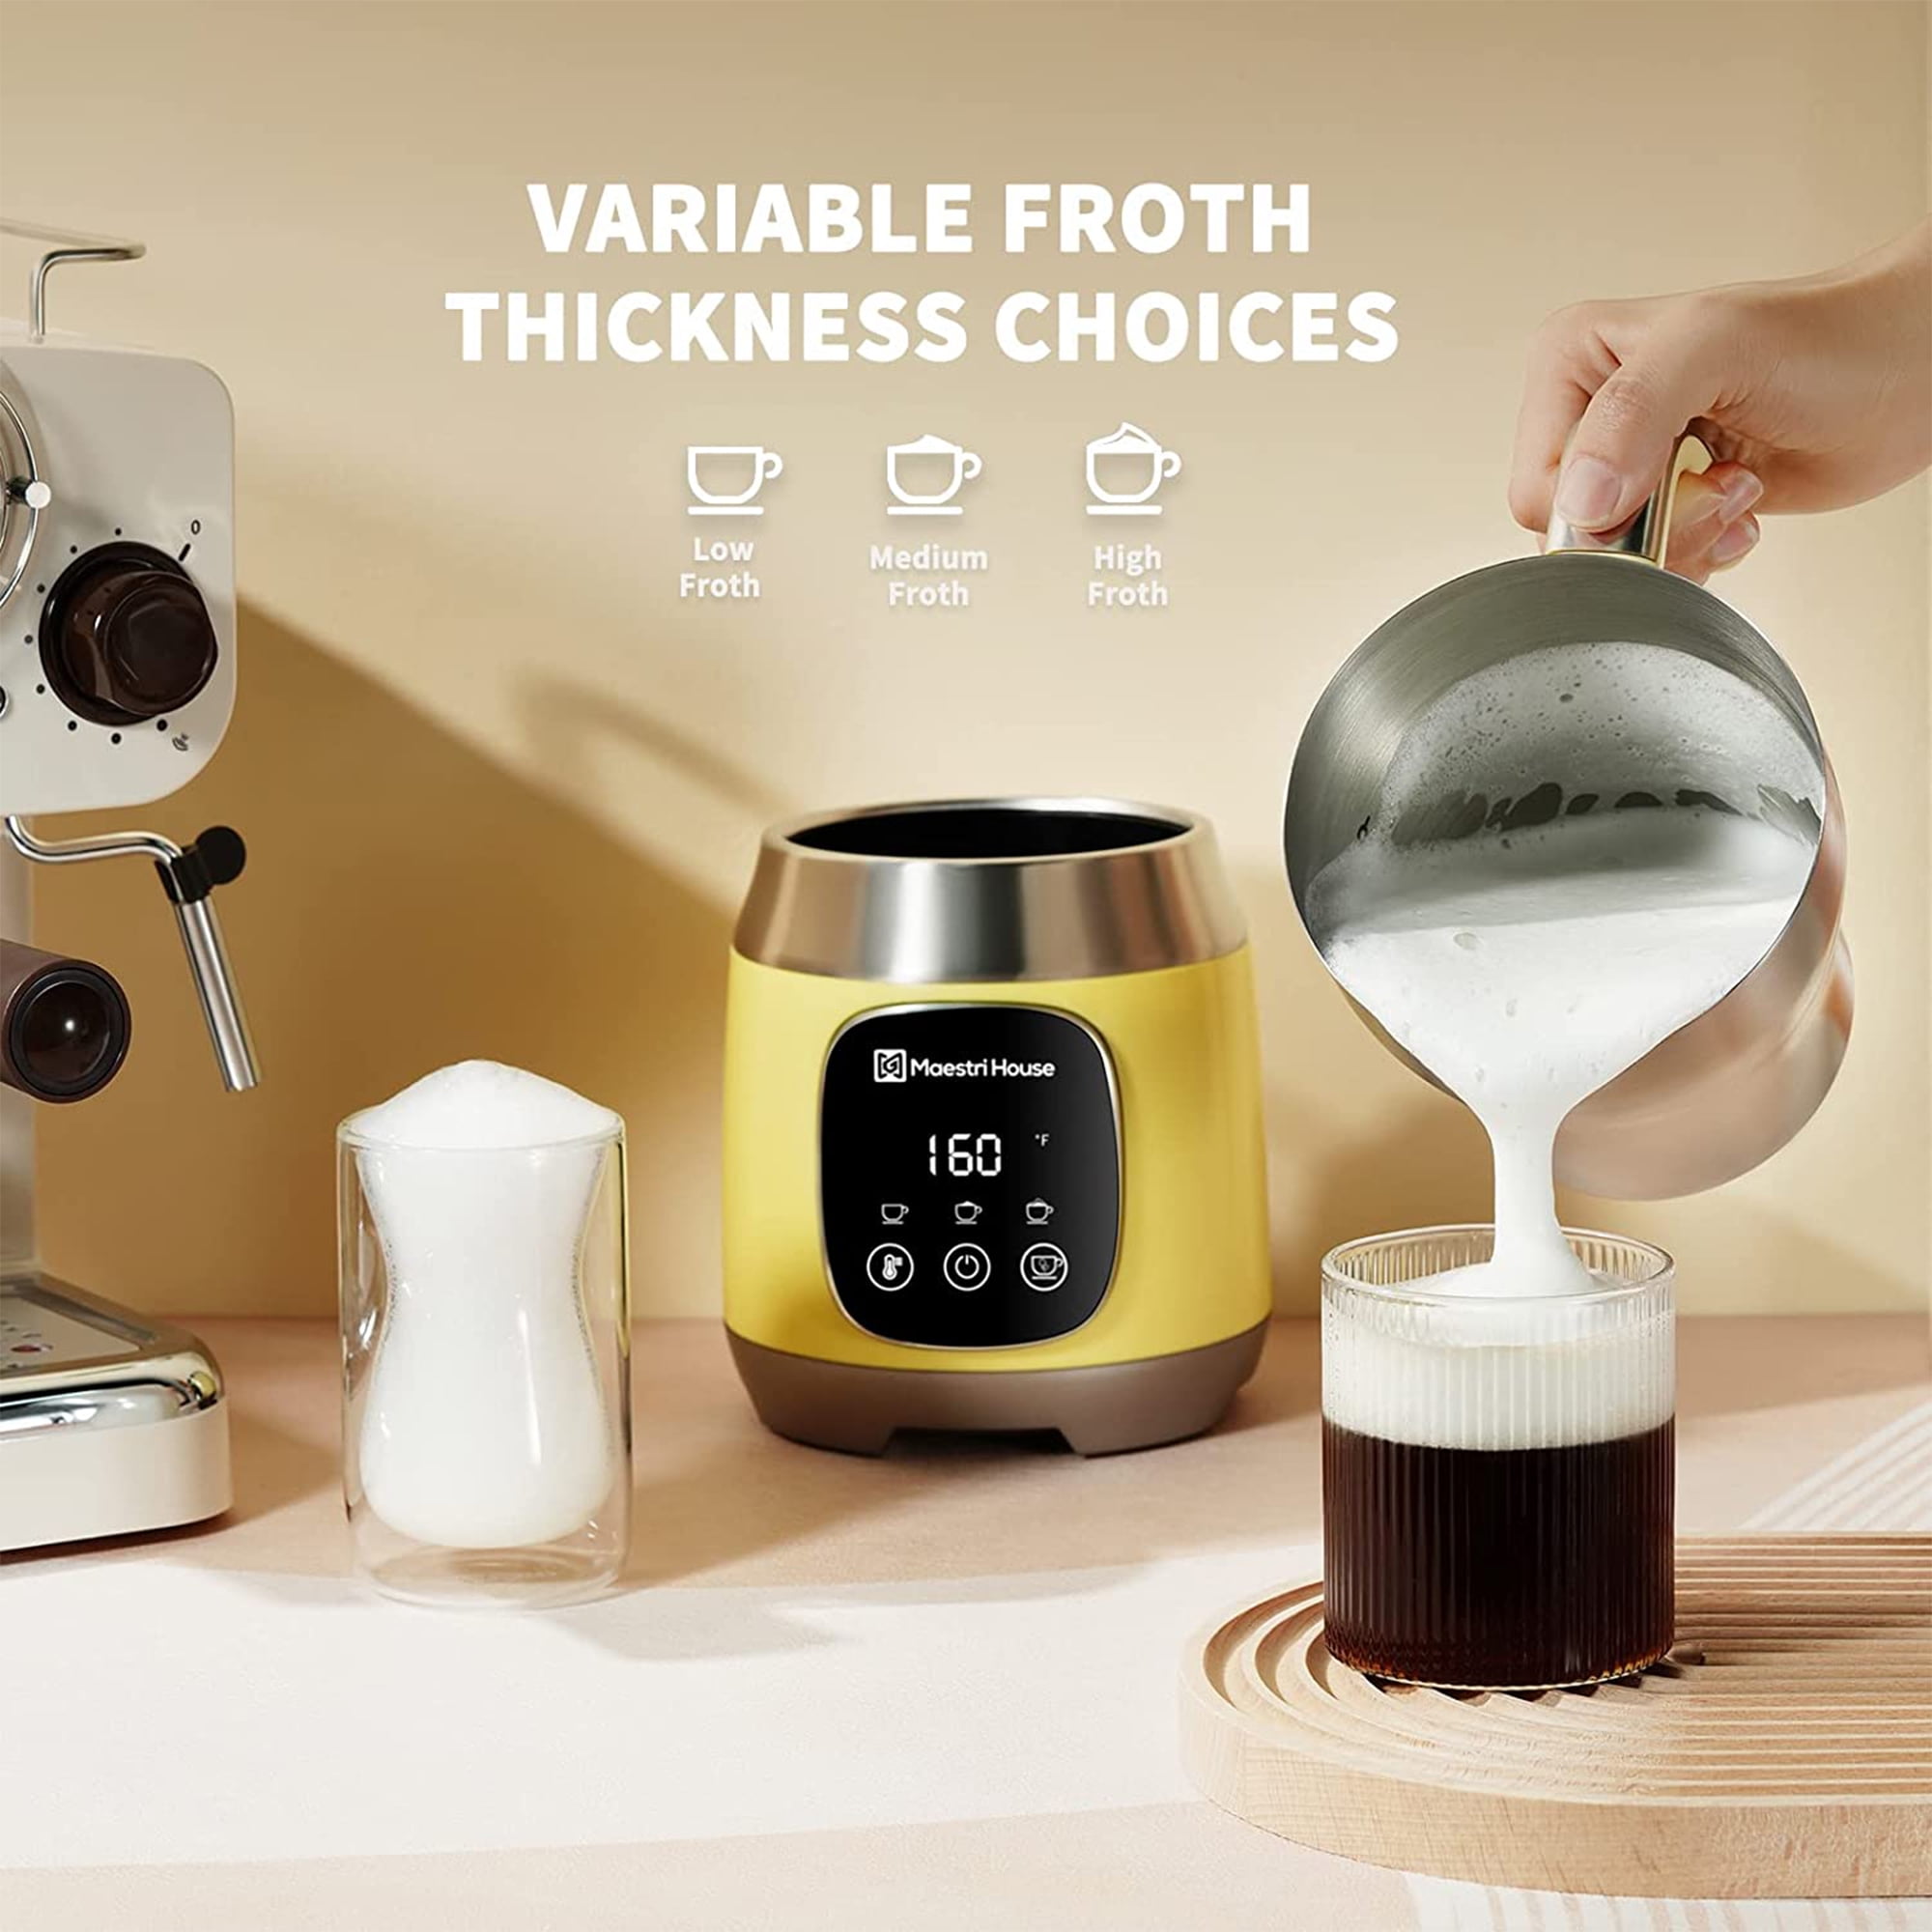 21 Ounce Detachable Smart Touch Digital Milk Frother Pot, White